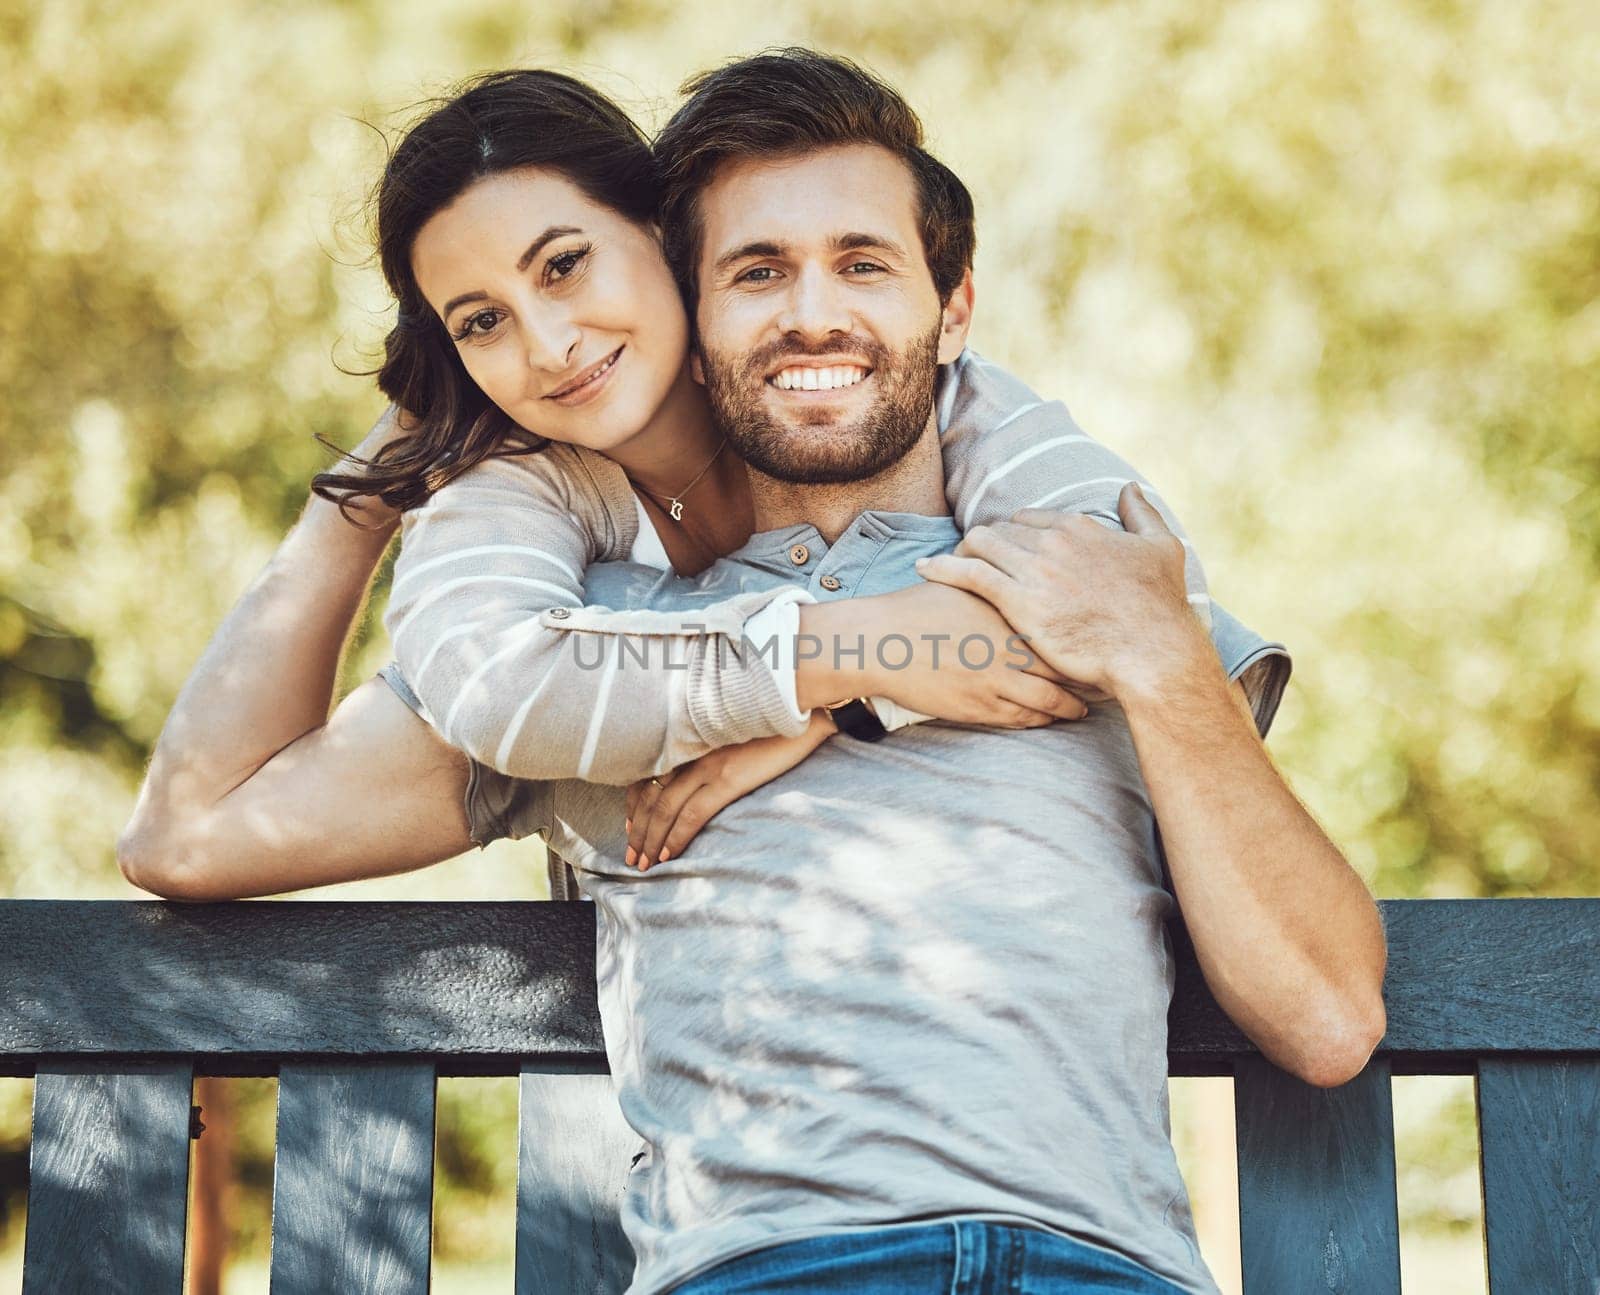 Love, couple and hug on park bench, portrait and having fun time together outdoors. Valentines day, romance relax and care of man and woman hugging, embrace and cuddle on romantic date and smile